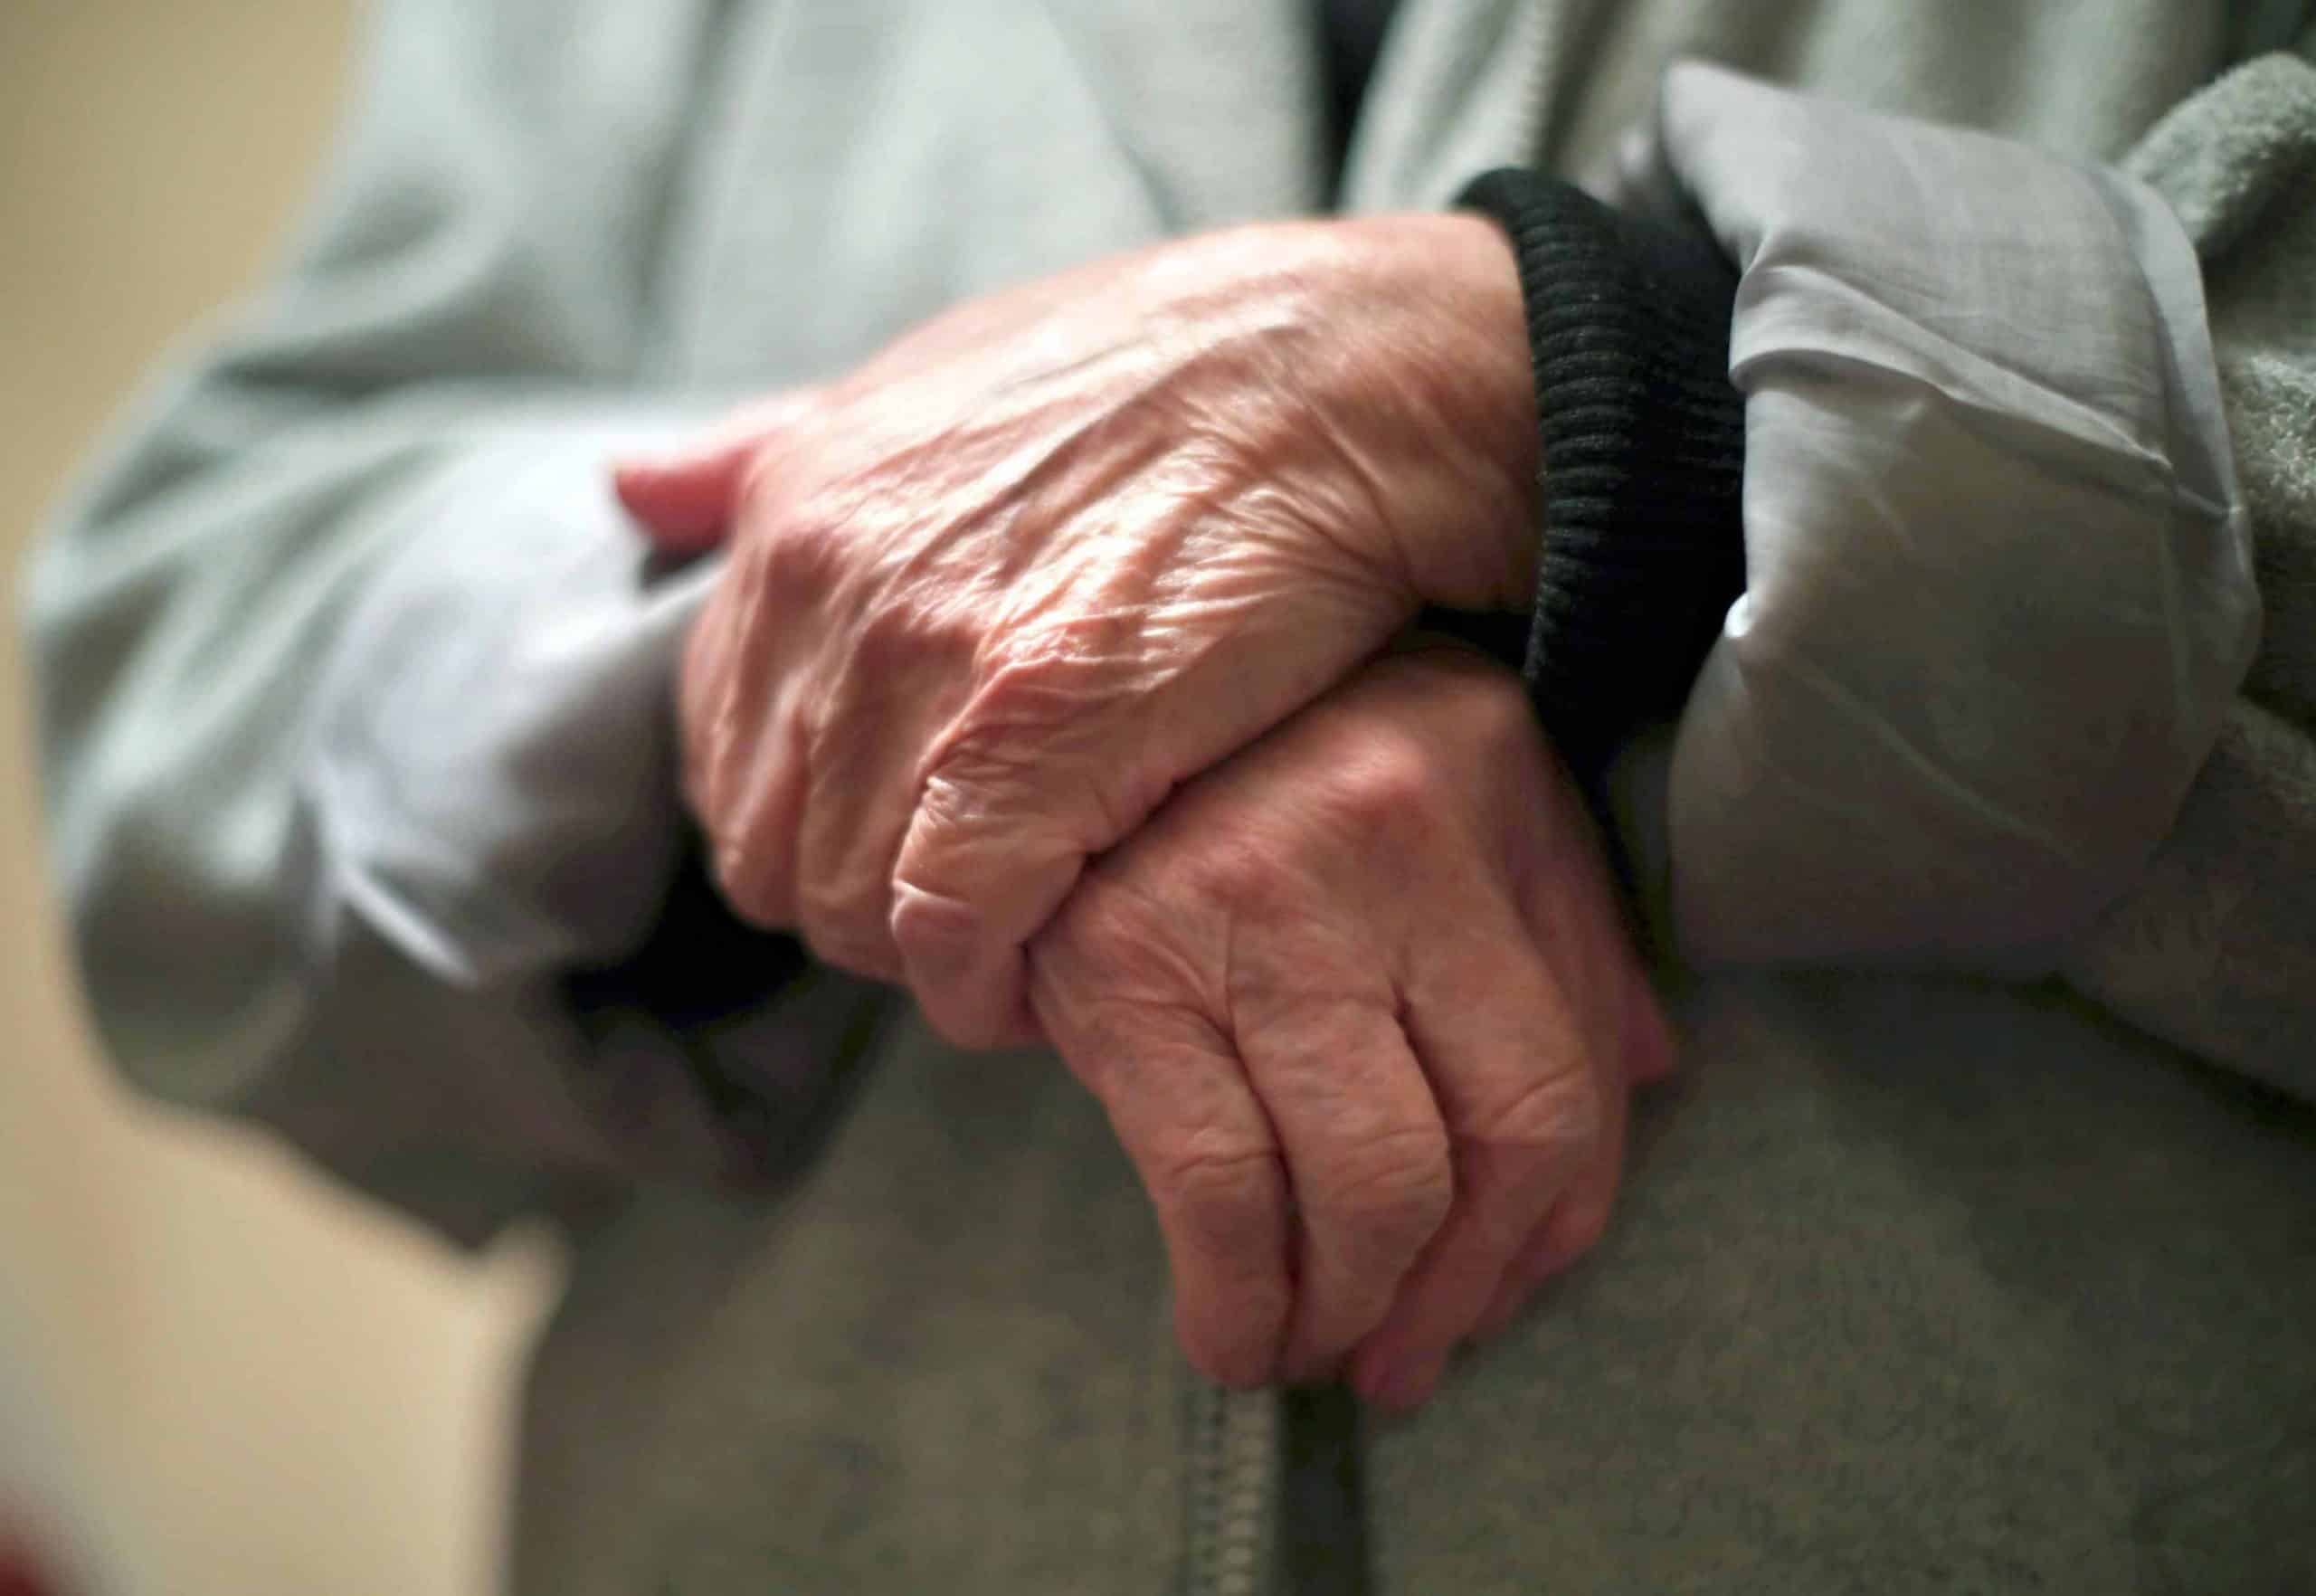 Vulnerable people in care ‘struggling to get free legal advice they need’